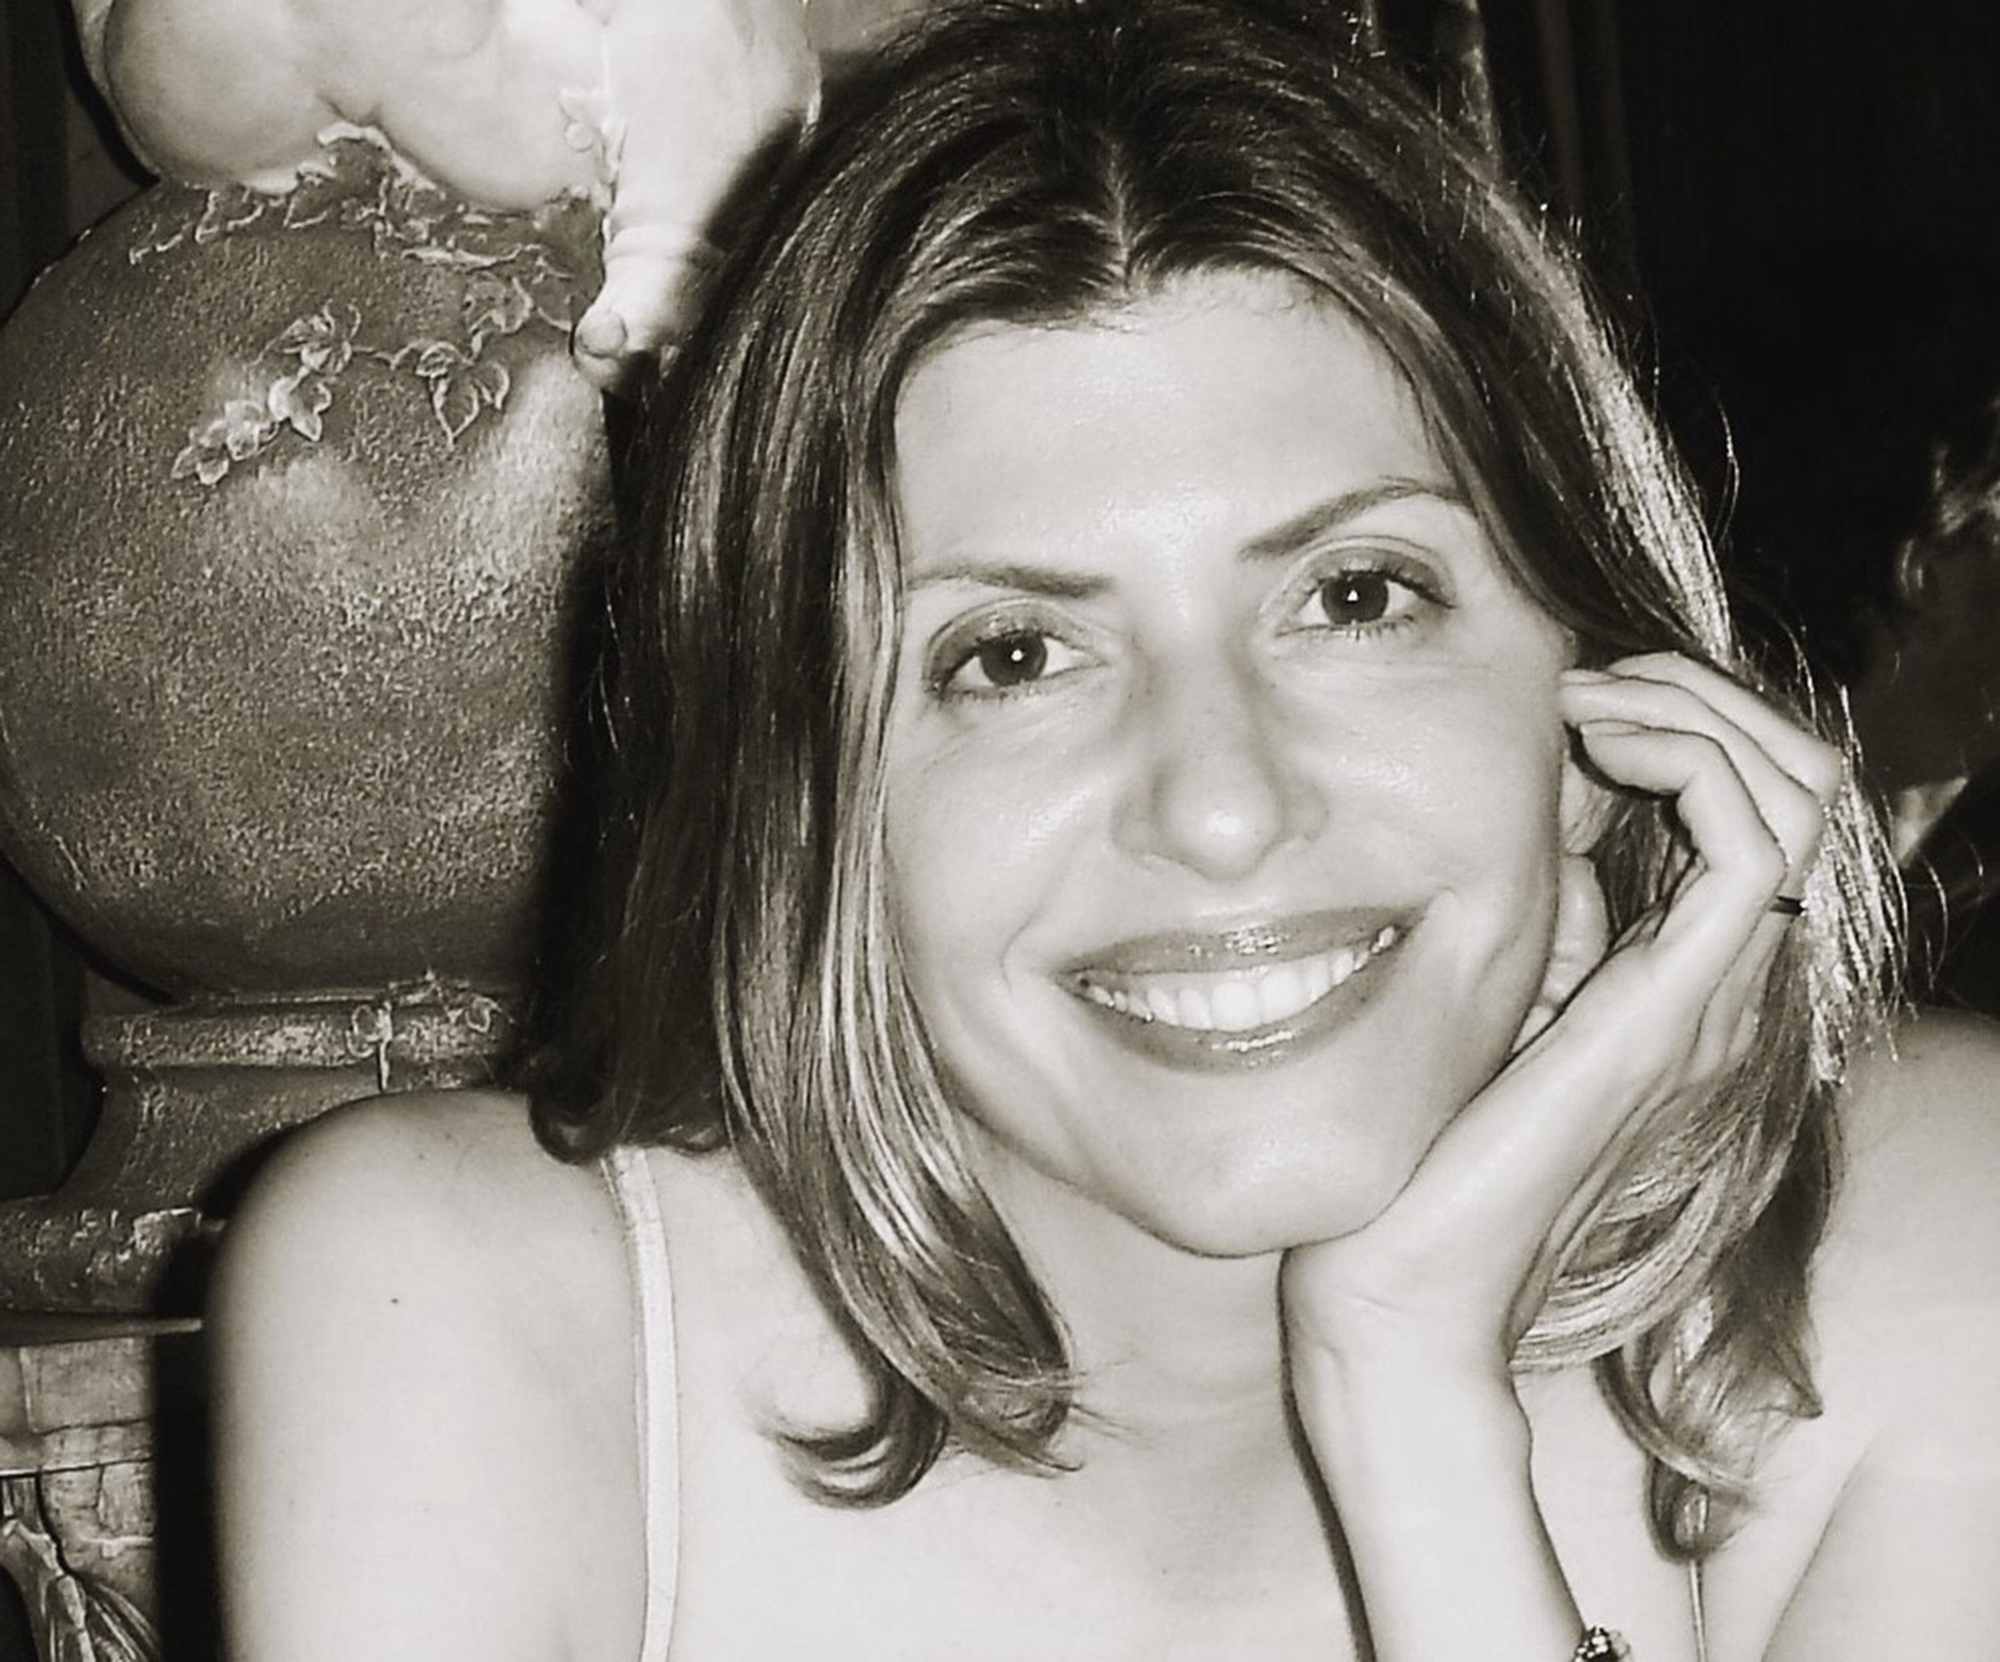 PHOTO: Police in Connecticut are looking for Jennifer Dulos, 50, who was last seen on May 24, 2019.